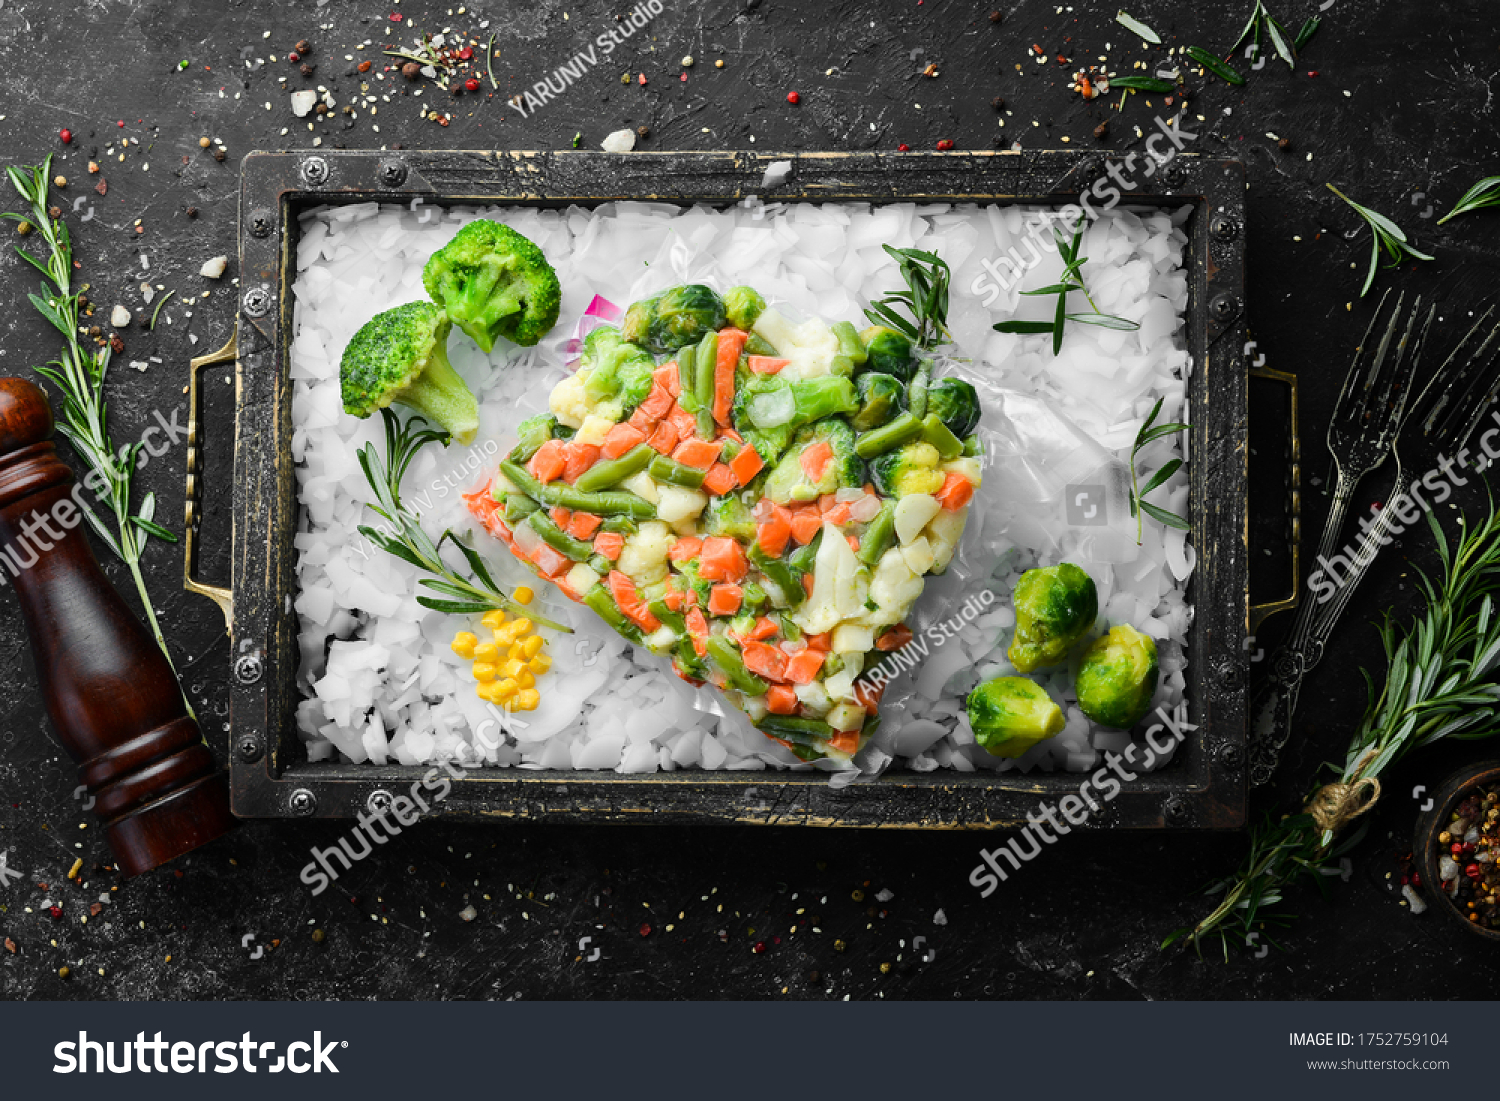 Assortment of frozen vegetables on ice. Stocks of food. Top view. Free space for your text. #1752759104